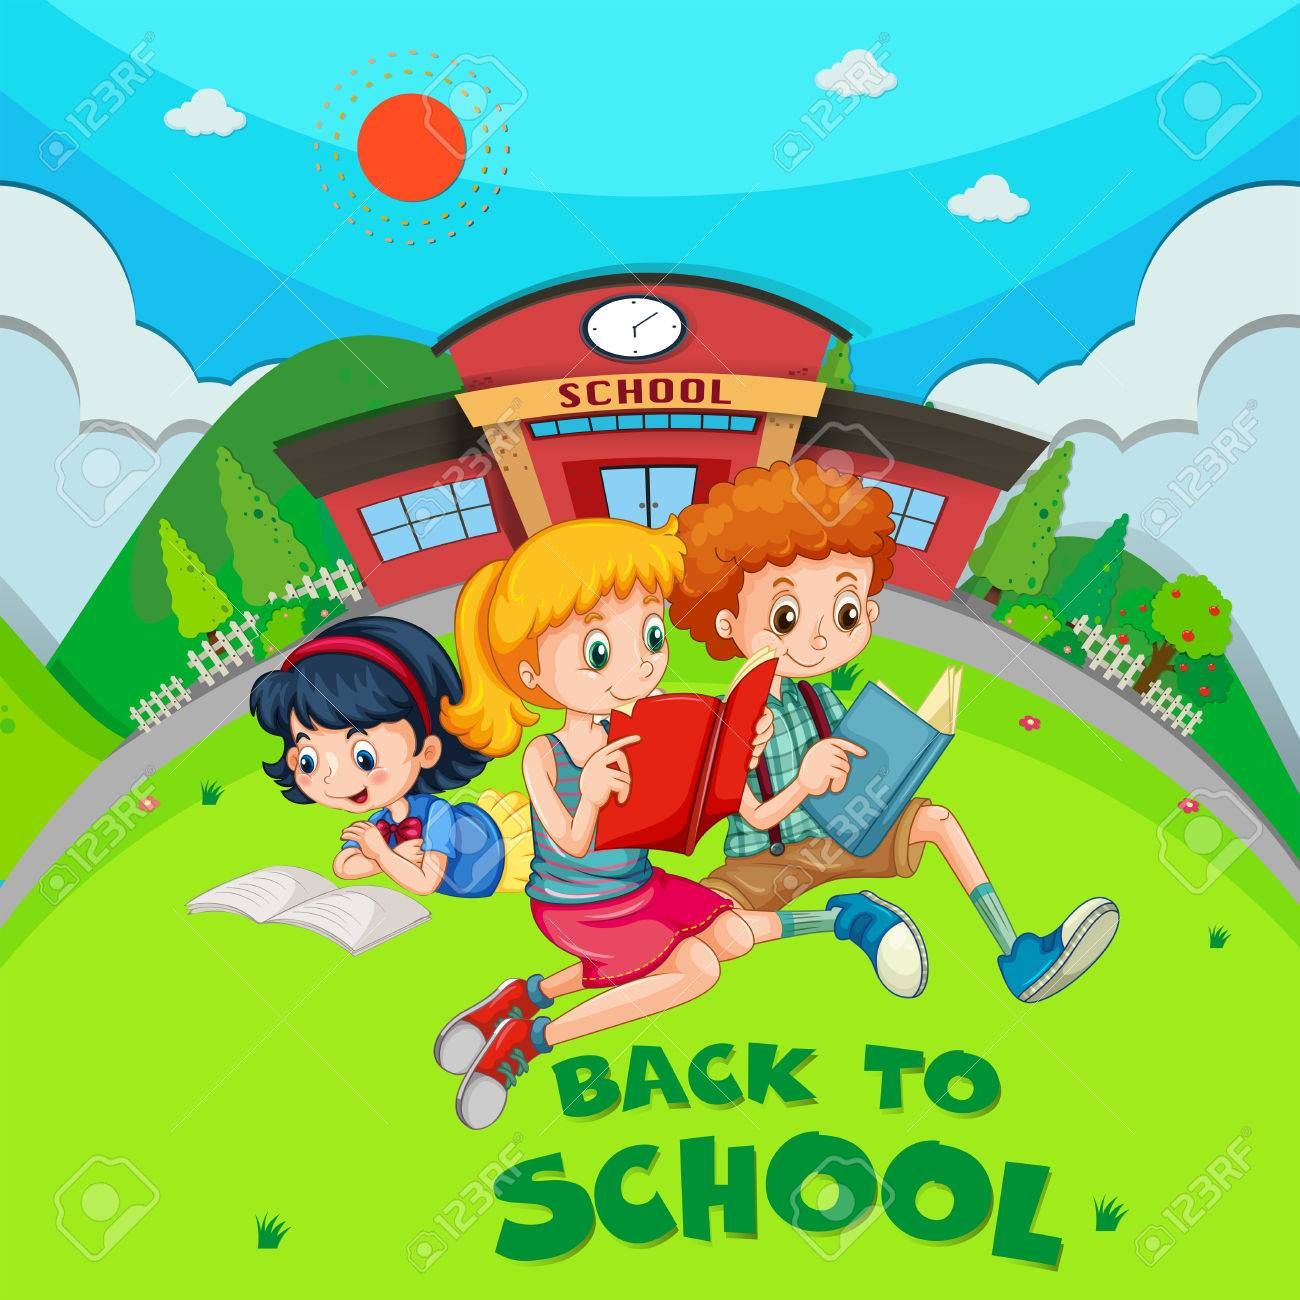 Ground clipart school. The grounds free images